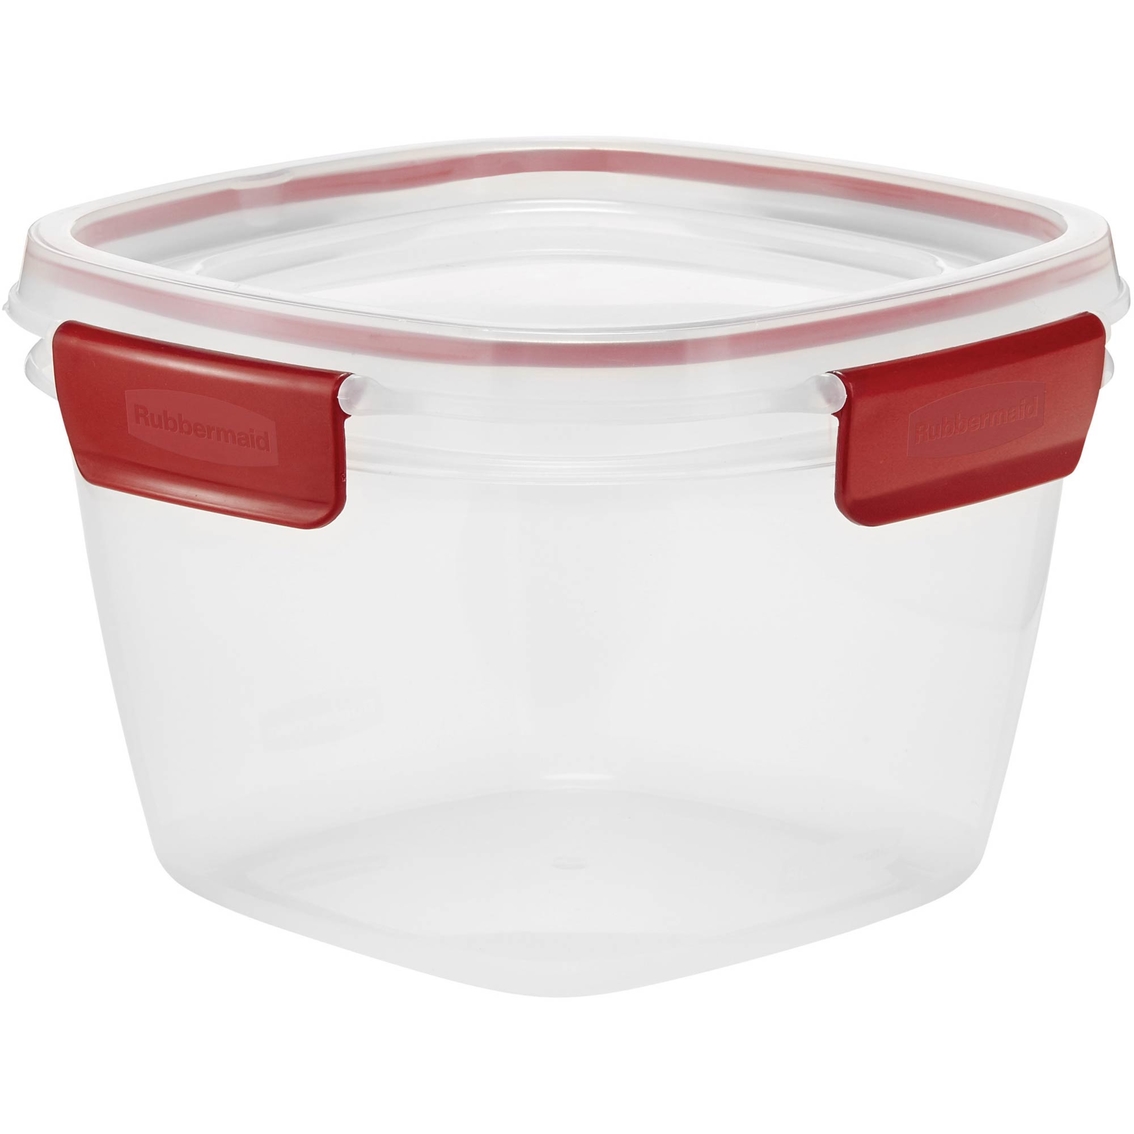 Rubbermaid 7 Cup Easy Find Lid Container, Lunch Bags, Sports & Outdoors